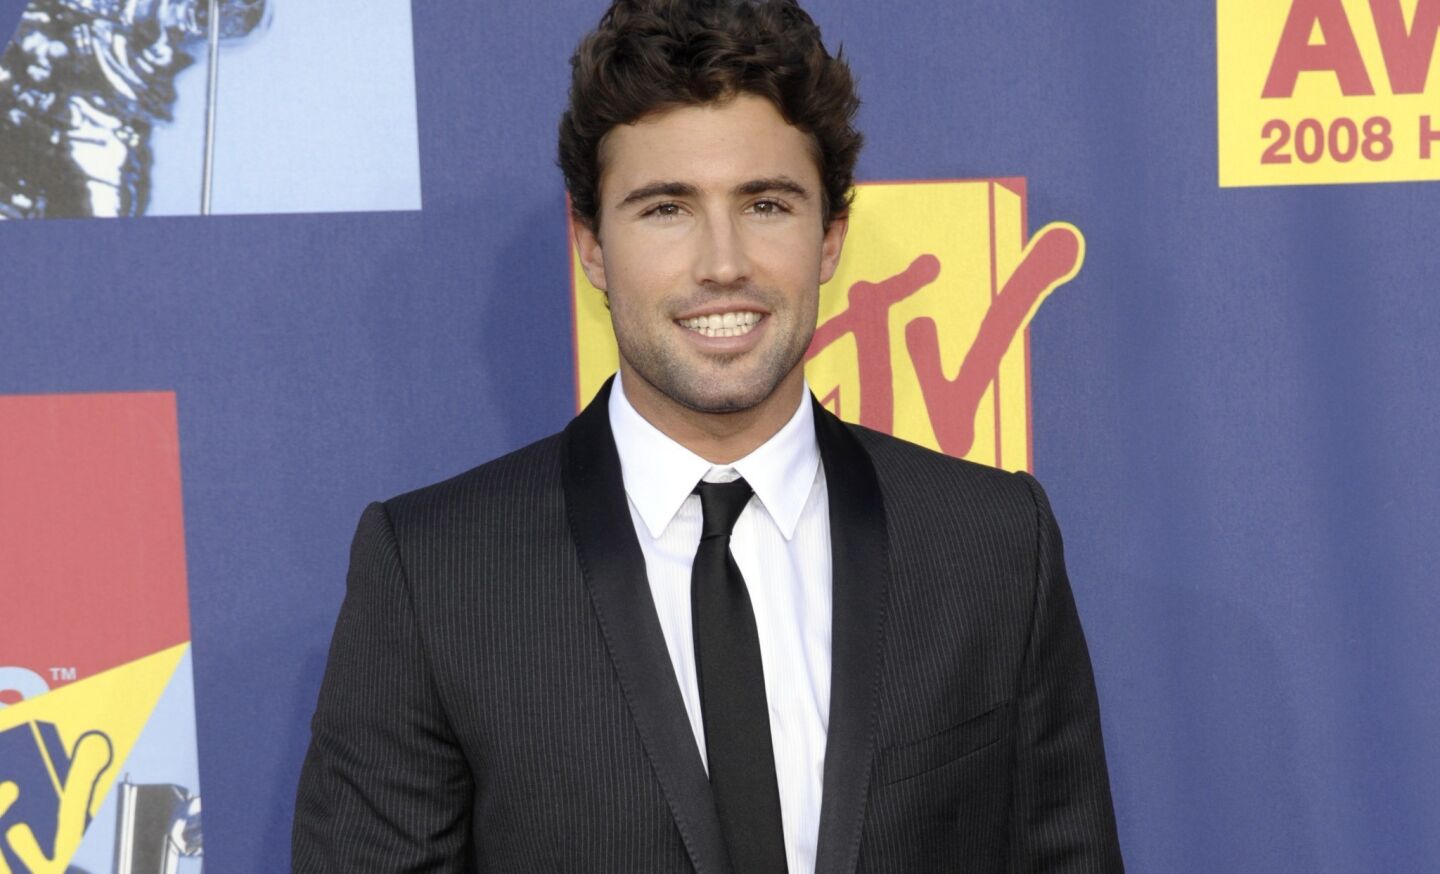 Brody Jenner is one of Caitlyn Jenner's four children from her second marriage. Brody has starred in MTV's "The Hills," in which he courted Lauren Conrad and later Kristin Cavallari, and his own short-lived series, "The Princes of Malibu." He has also minimally appeared in early seasons of "Keeping Up With the Kardashians," notably being called on by stepbro Rob Kardashian to babysit their half sisters Kylie and Kendall Jenner.